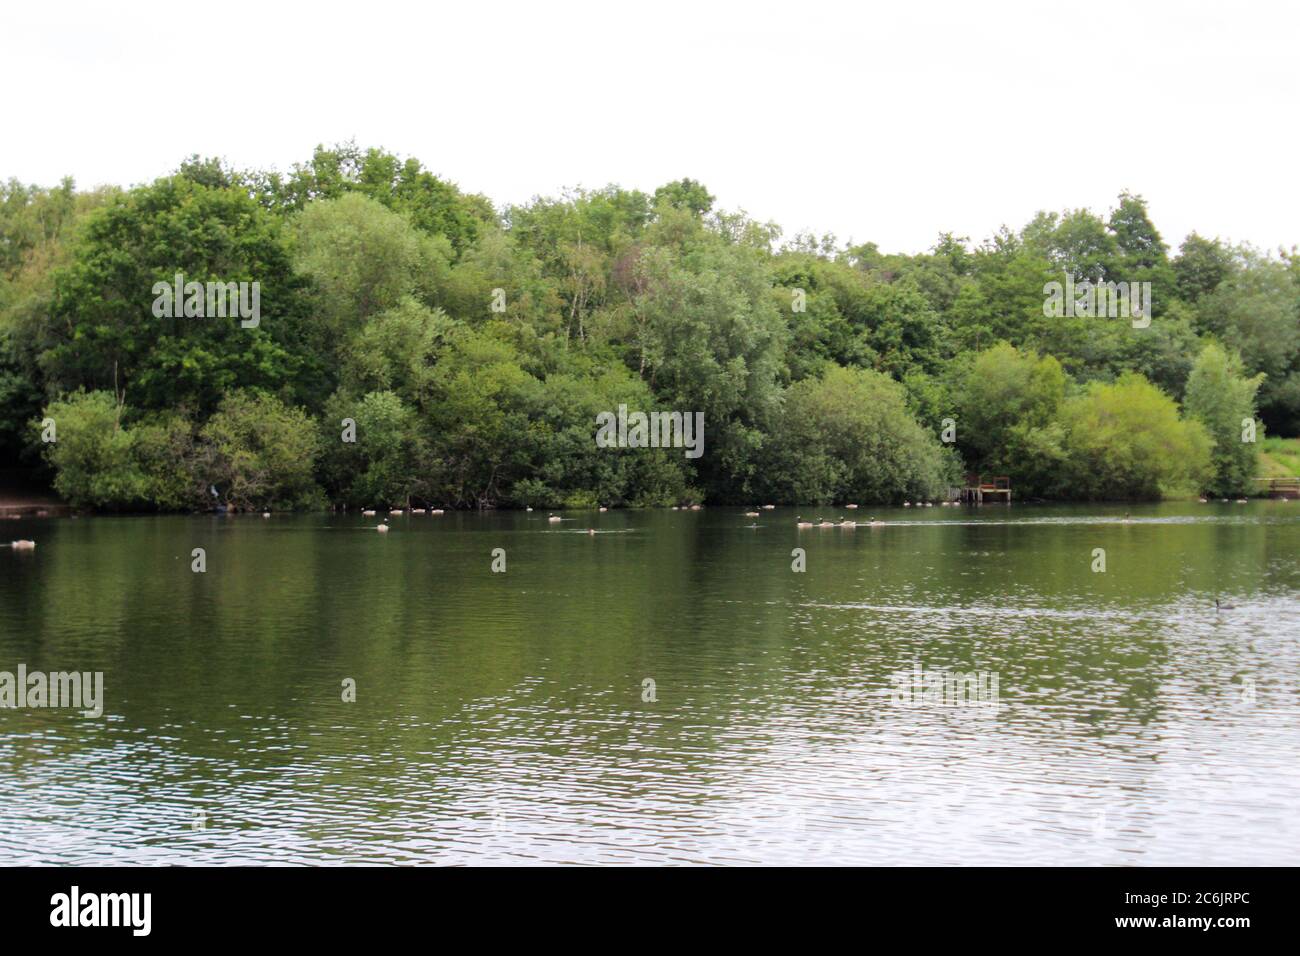 Chorlton water park scenery, inc a lake and trees, on a cloudy day in Manchester, England Stock Photo